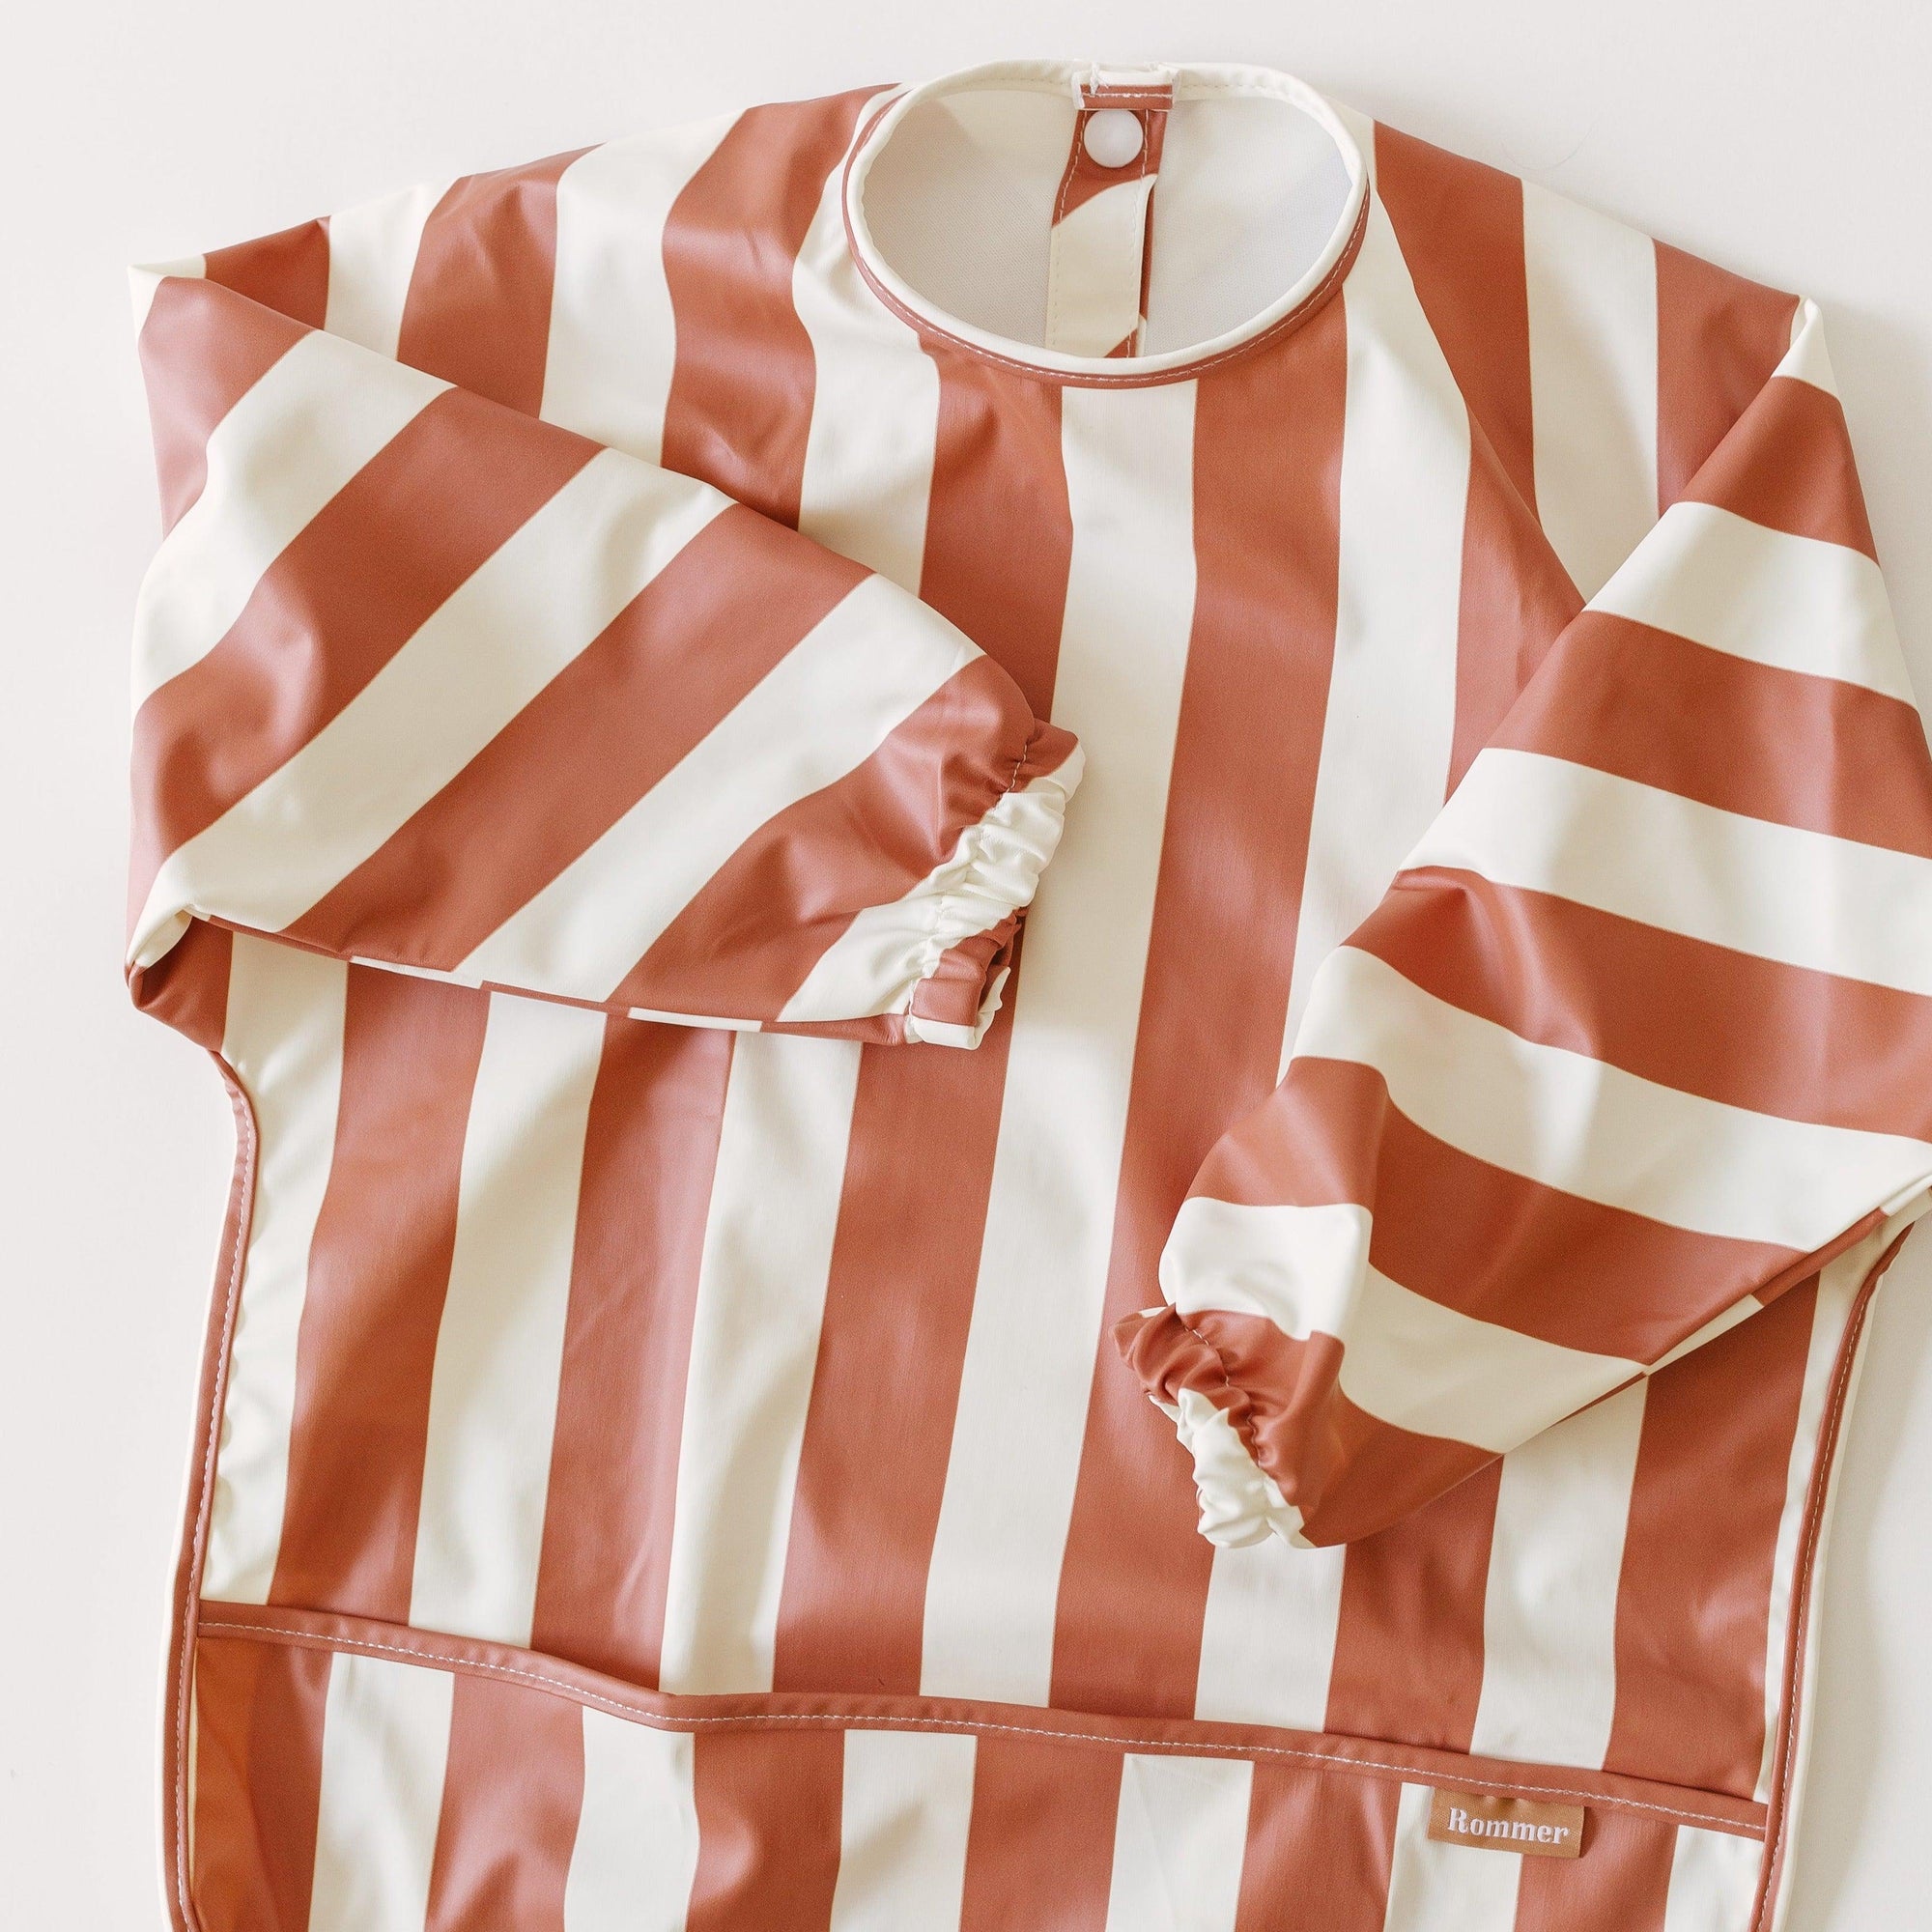 A red and white striped Rommer Smock Bib on a white background.